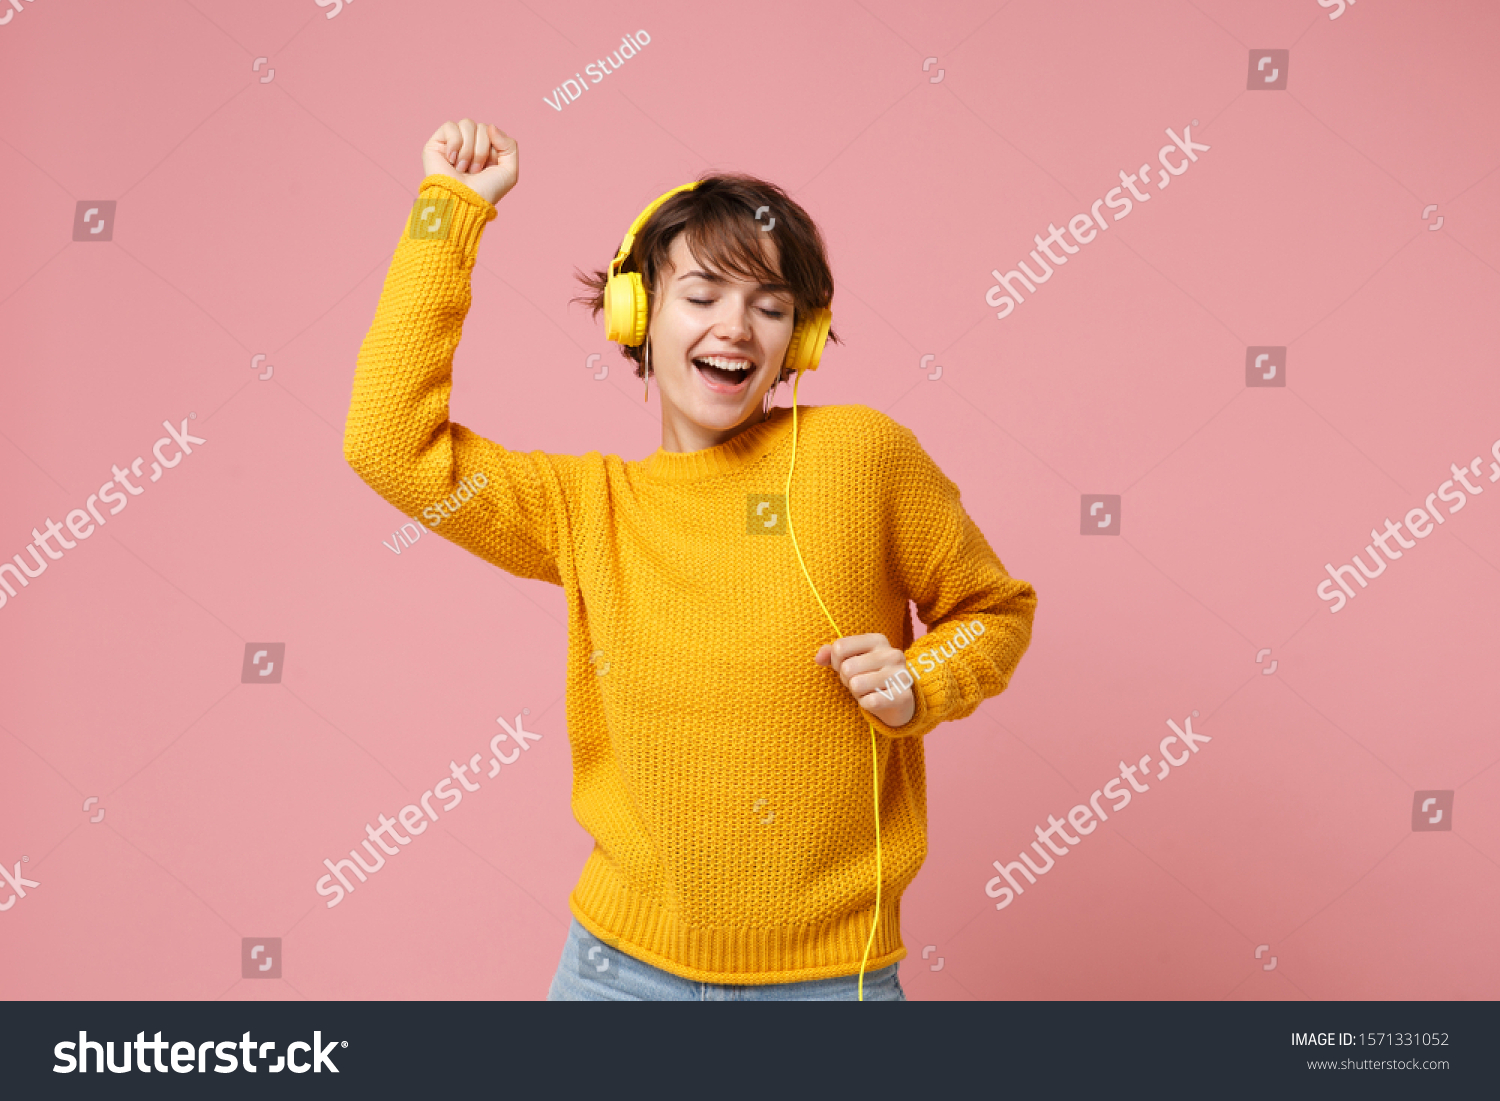 Cheerful young brunette woman girl in yellow sweater posing isolated on pastel pink wall background studio portait. People lifestyle concept. Mock up copy space. Listen music with headphones, dancing #1571331052